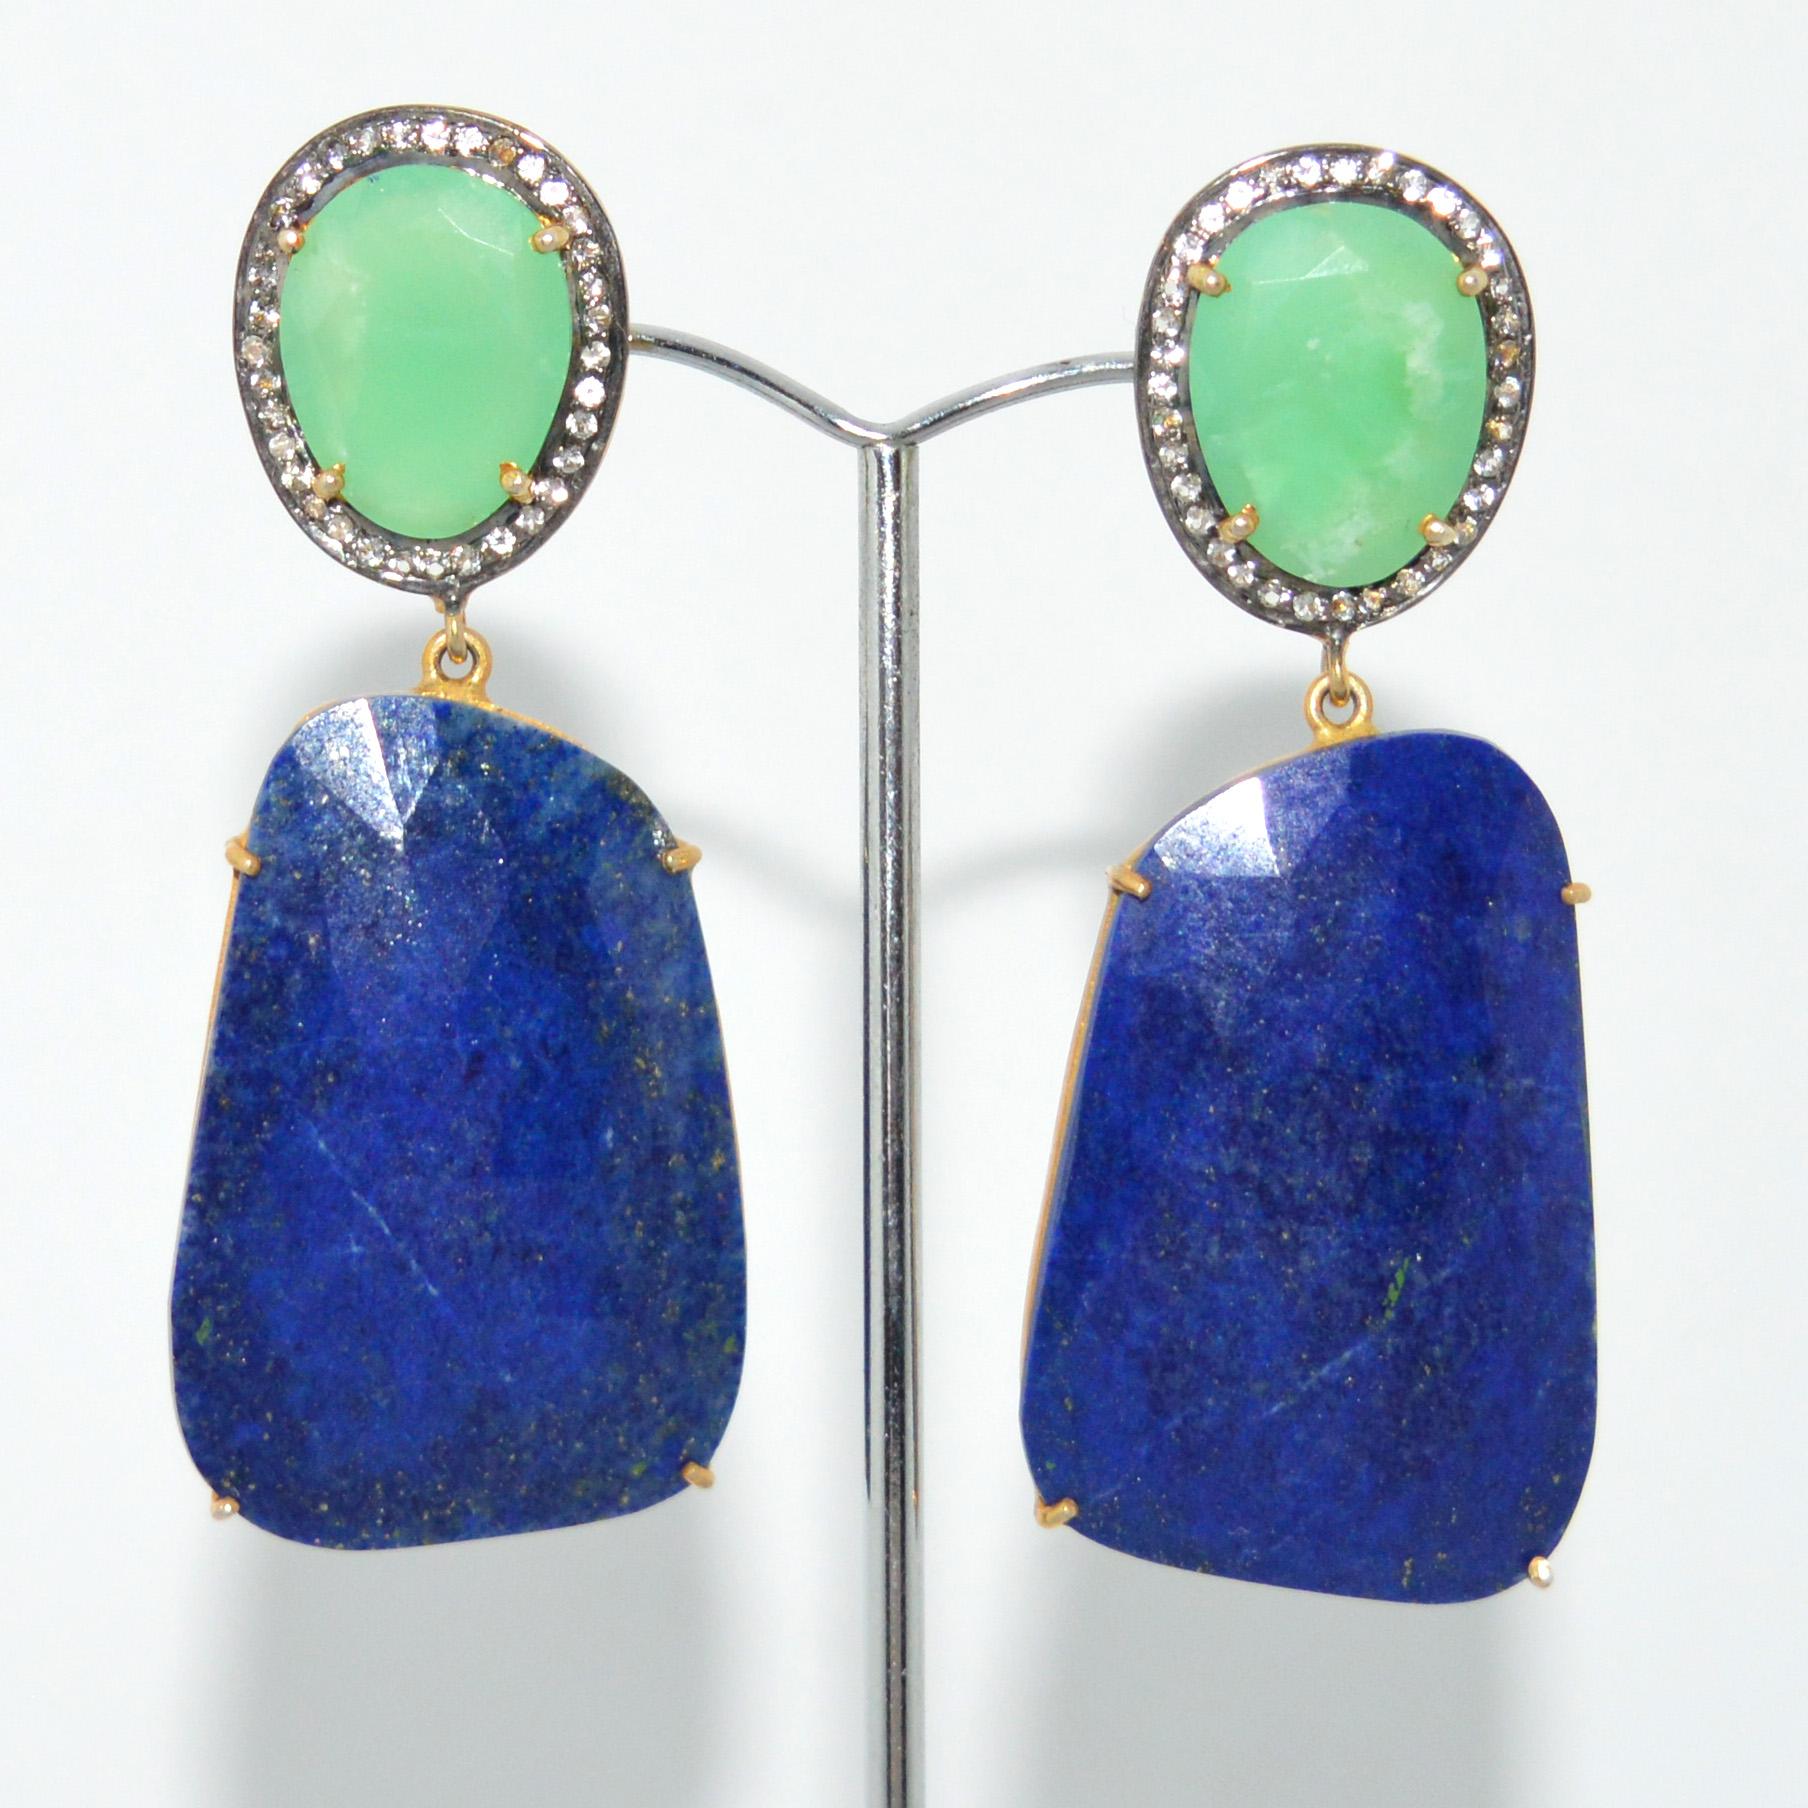 A Beautiful design Chrysoprase, and  Lapis Lazuli, complement each other surrounded with Rose cut Diamonds.
Description
Setting Sterling Silver Gold Plated
Diamond aprrox 1 Pointers 
Chrysoprase Faceted 16mm x 12.35mm
Lapis Lazuli Faceted 37.60mm x